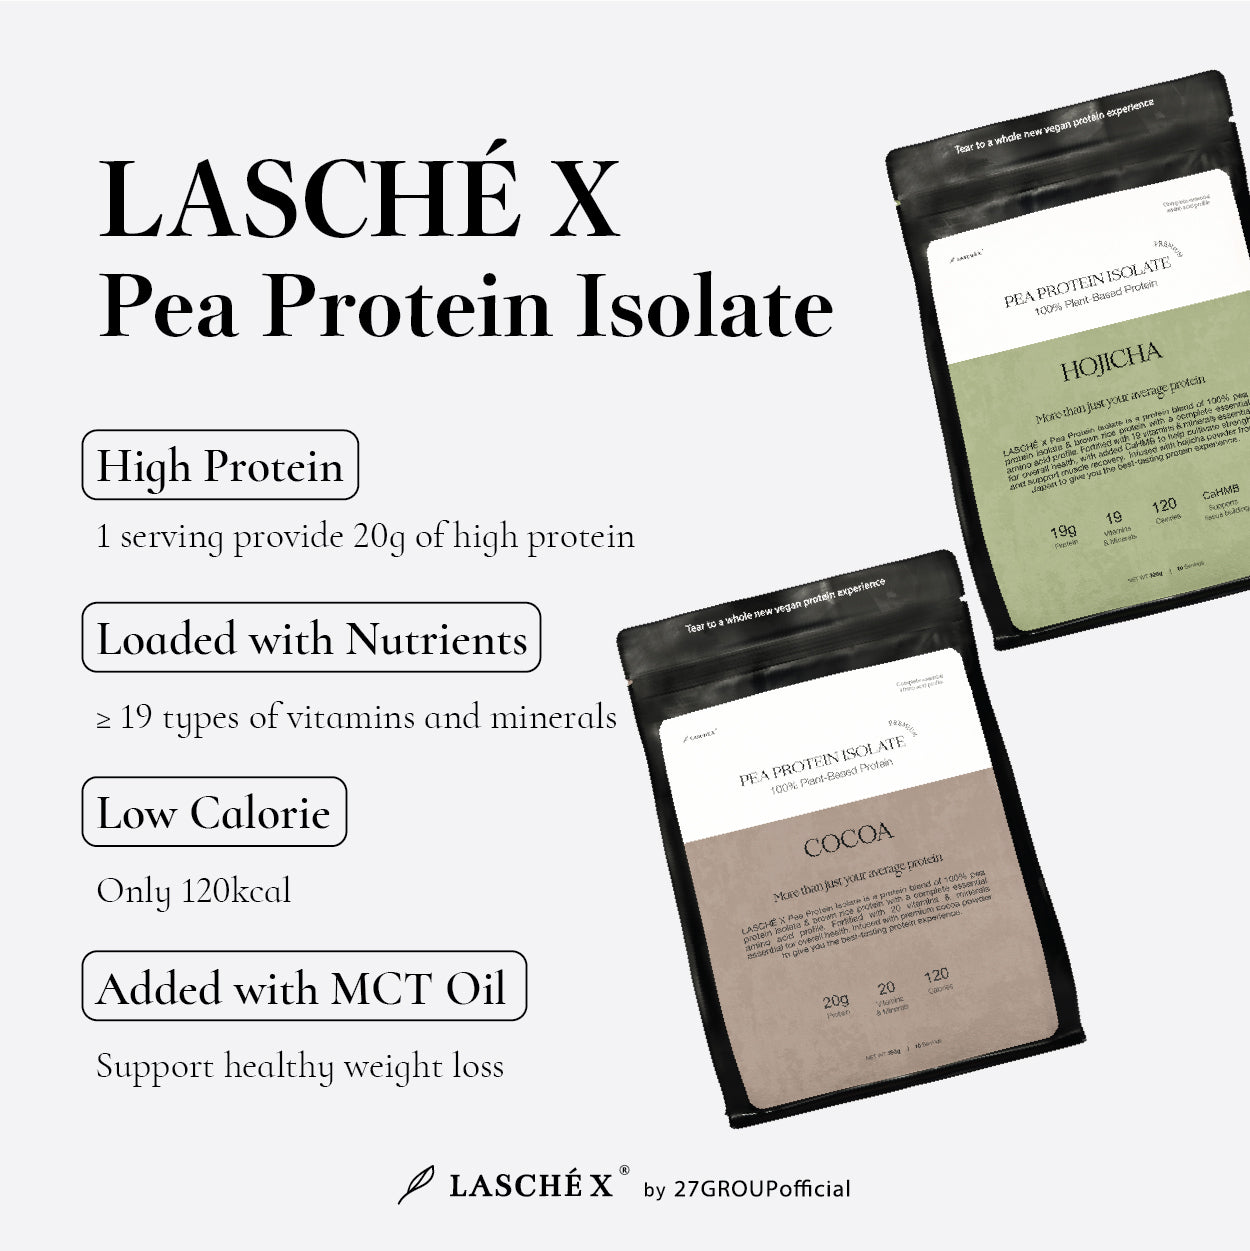 benefits of lasché x pea protein isolate